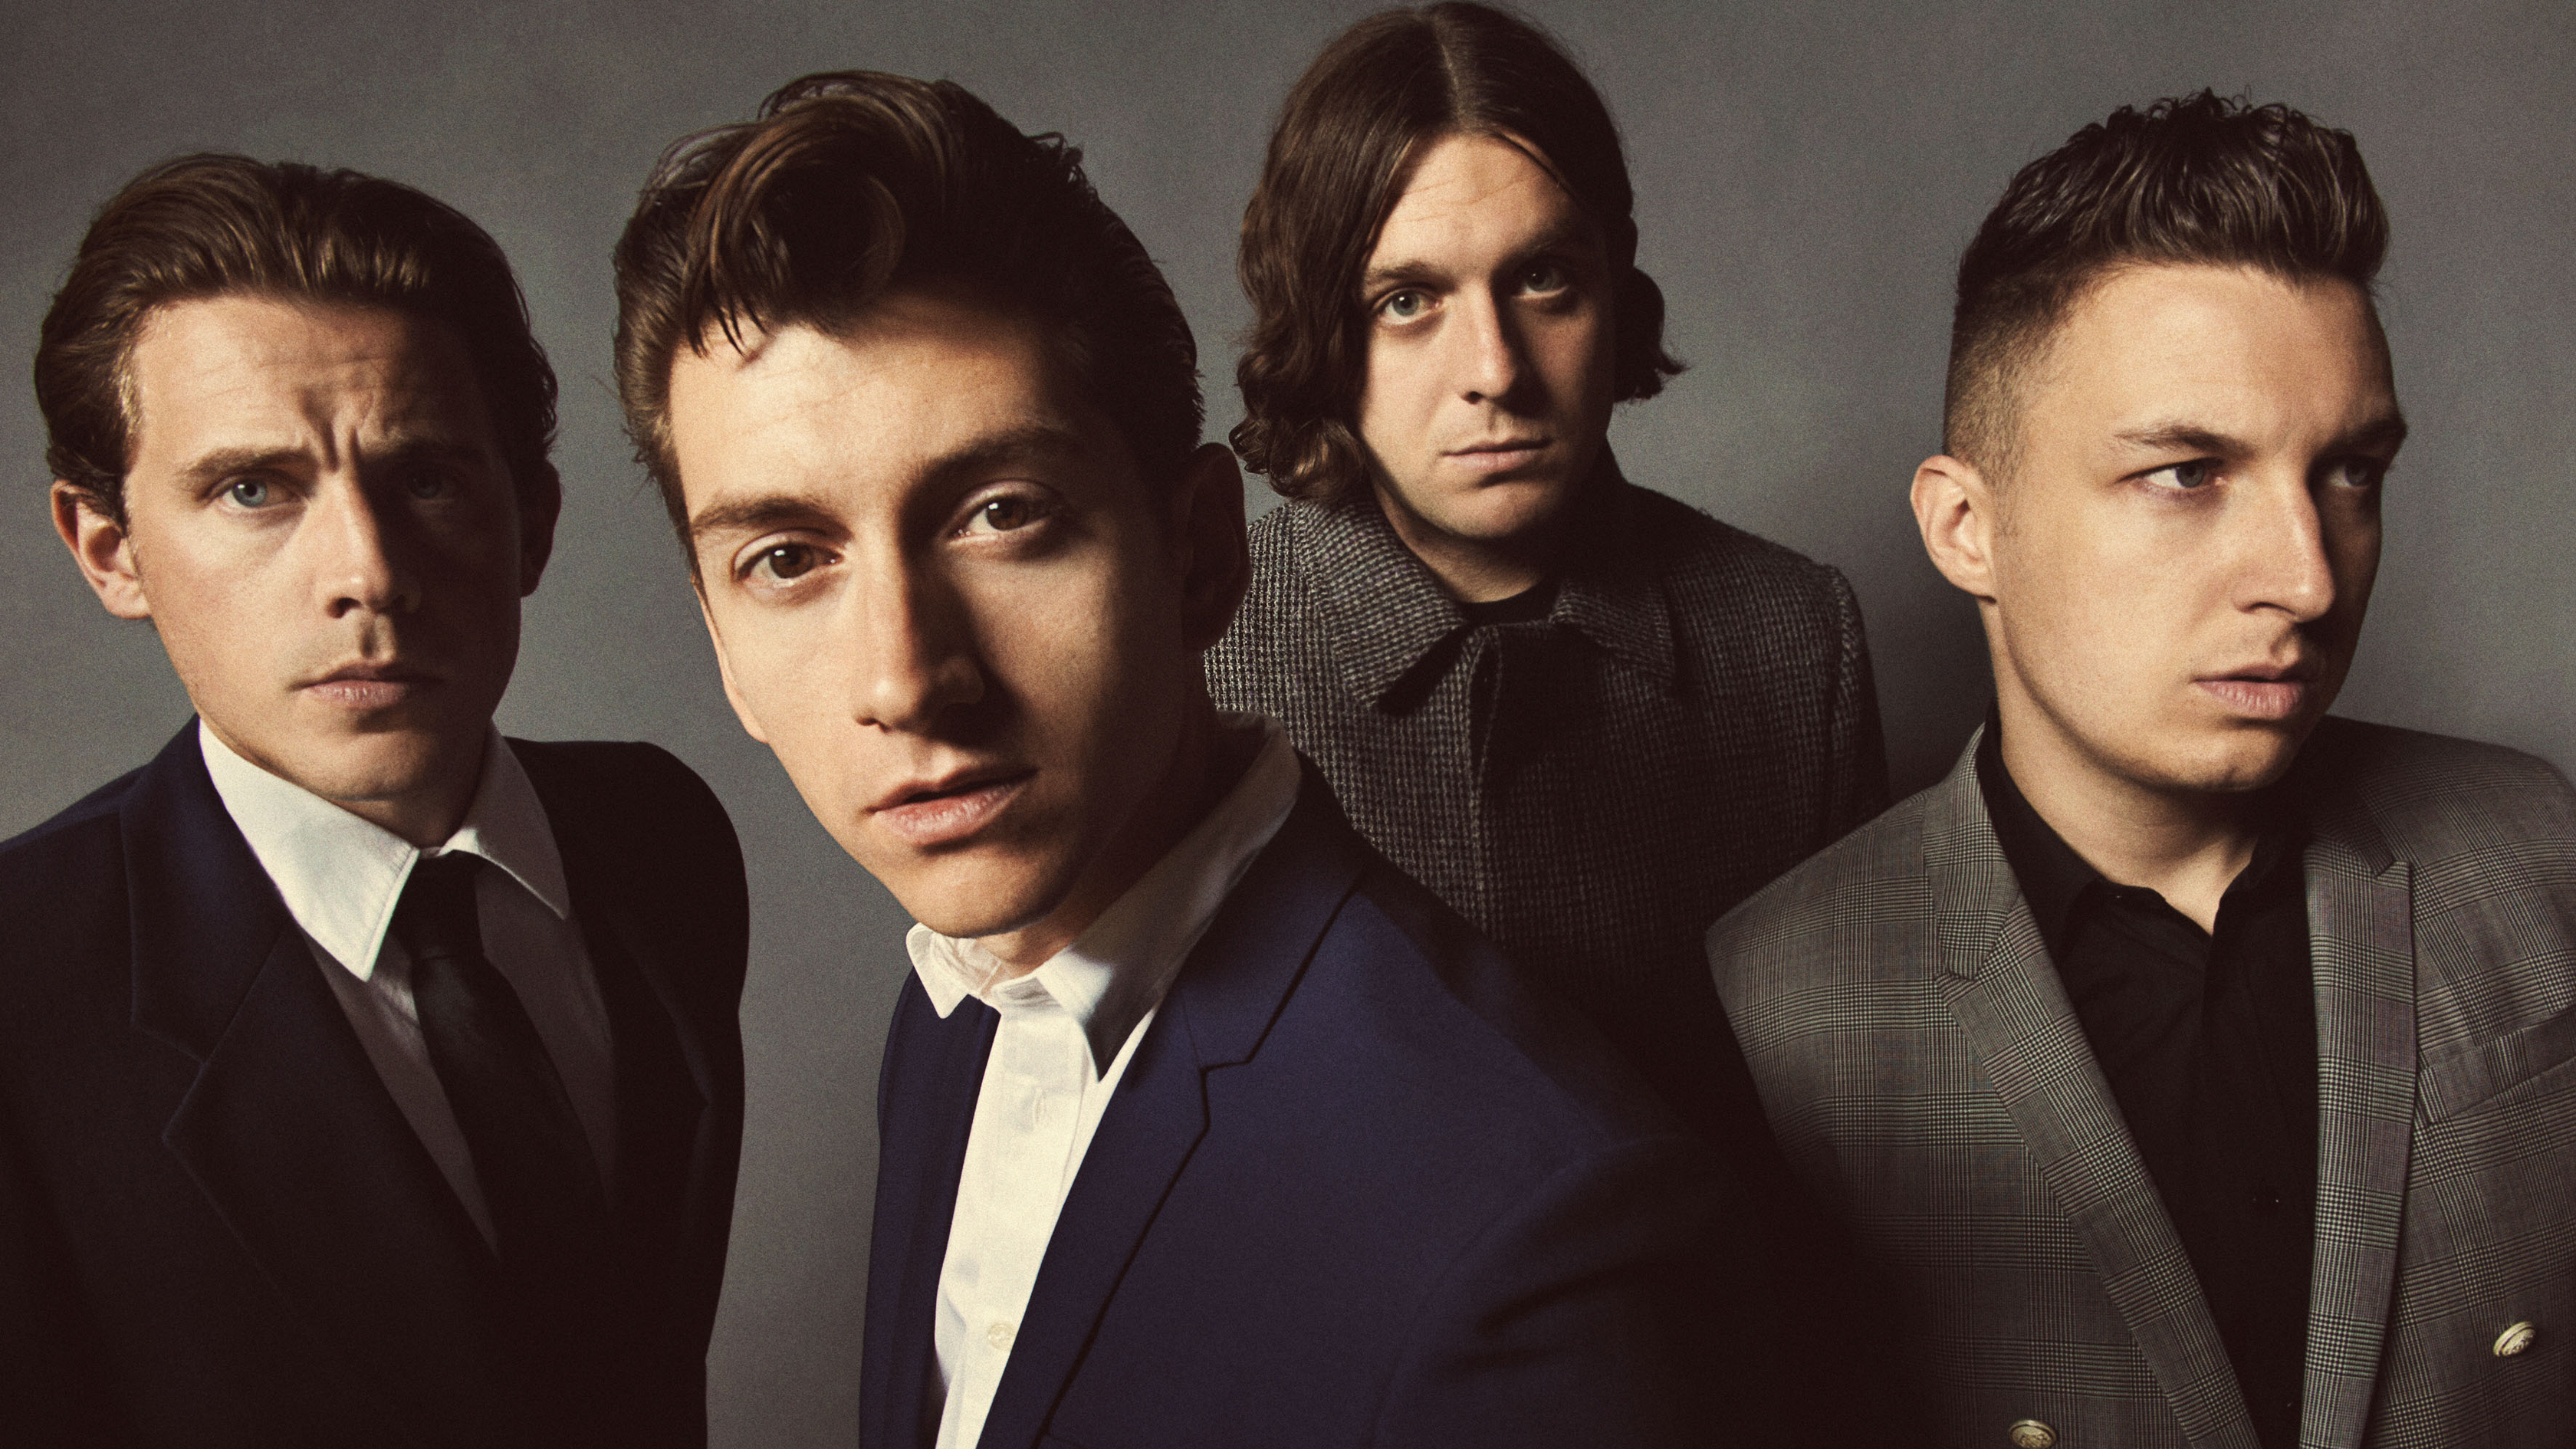 arctic monkeys wallpaper hd,white collar worker,photography,suit,facial hair